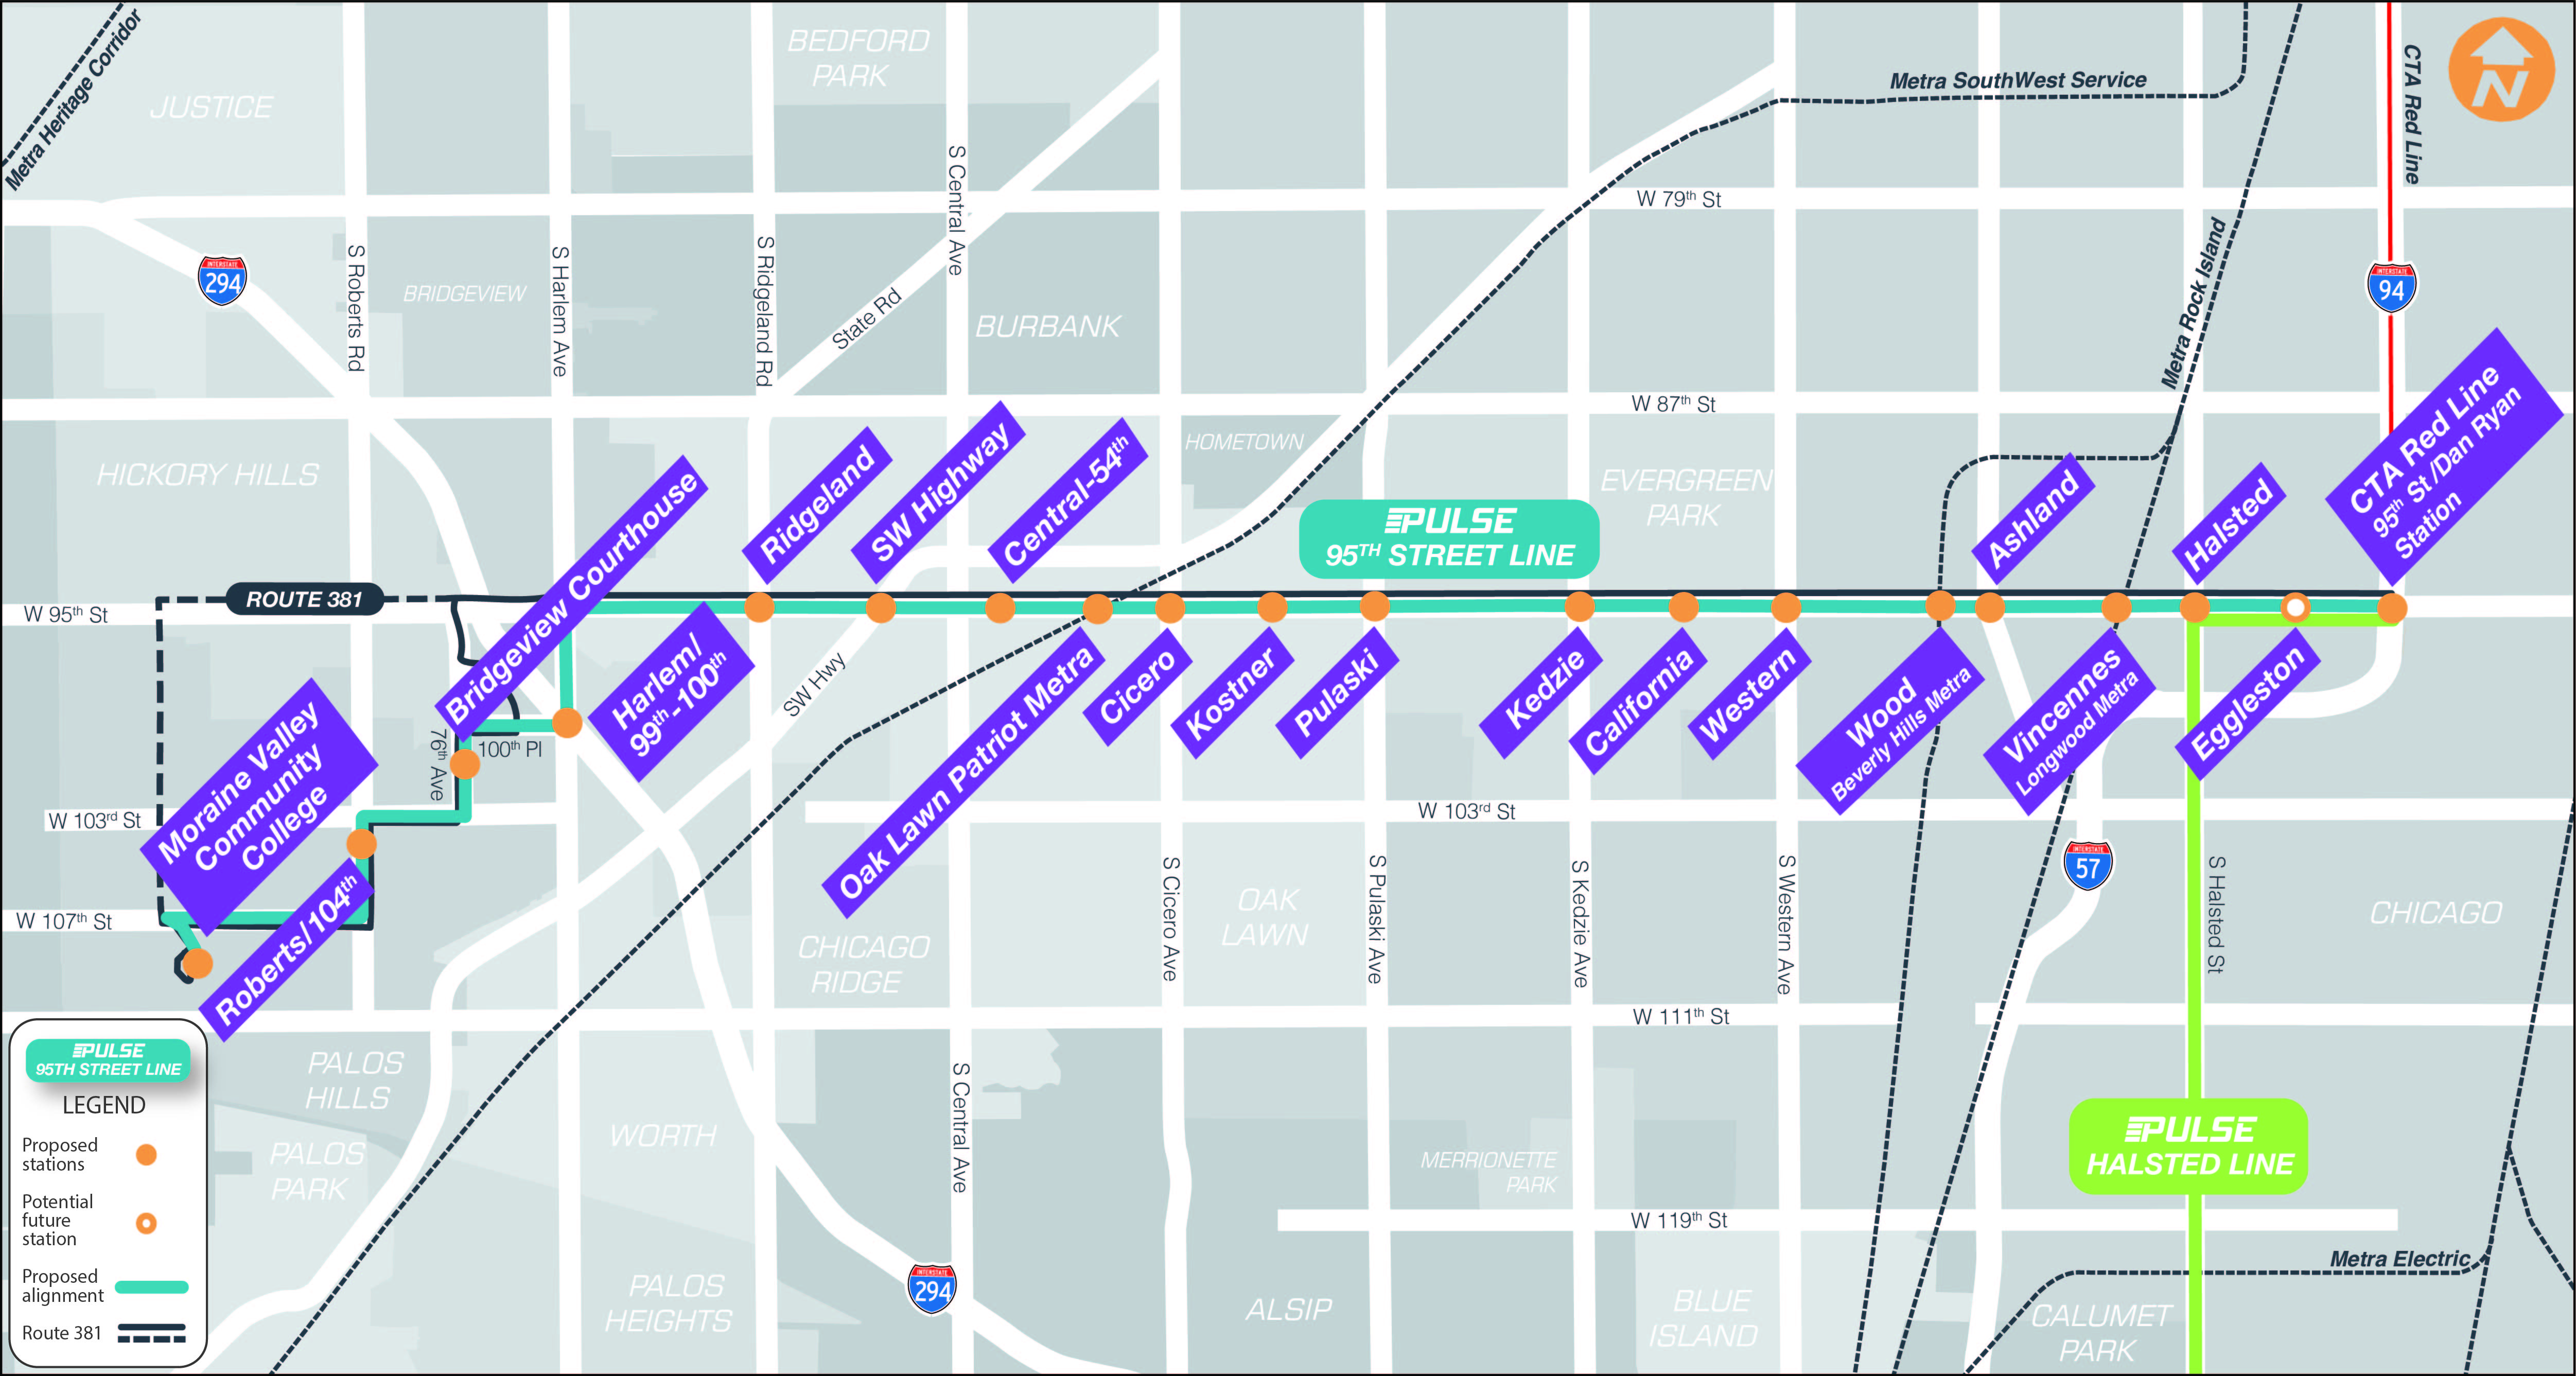 Image of the Pulse 95th Street Line Map